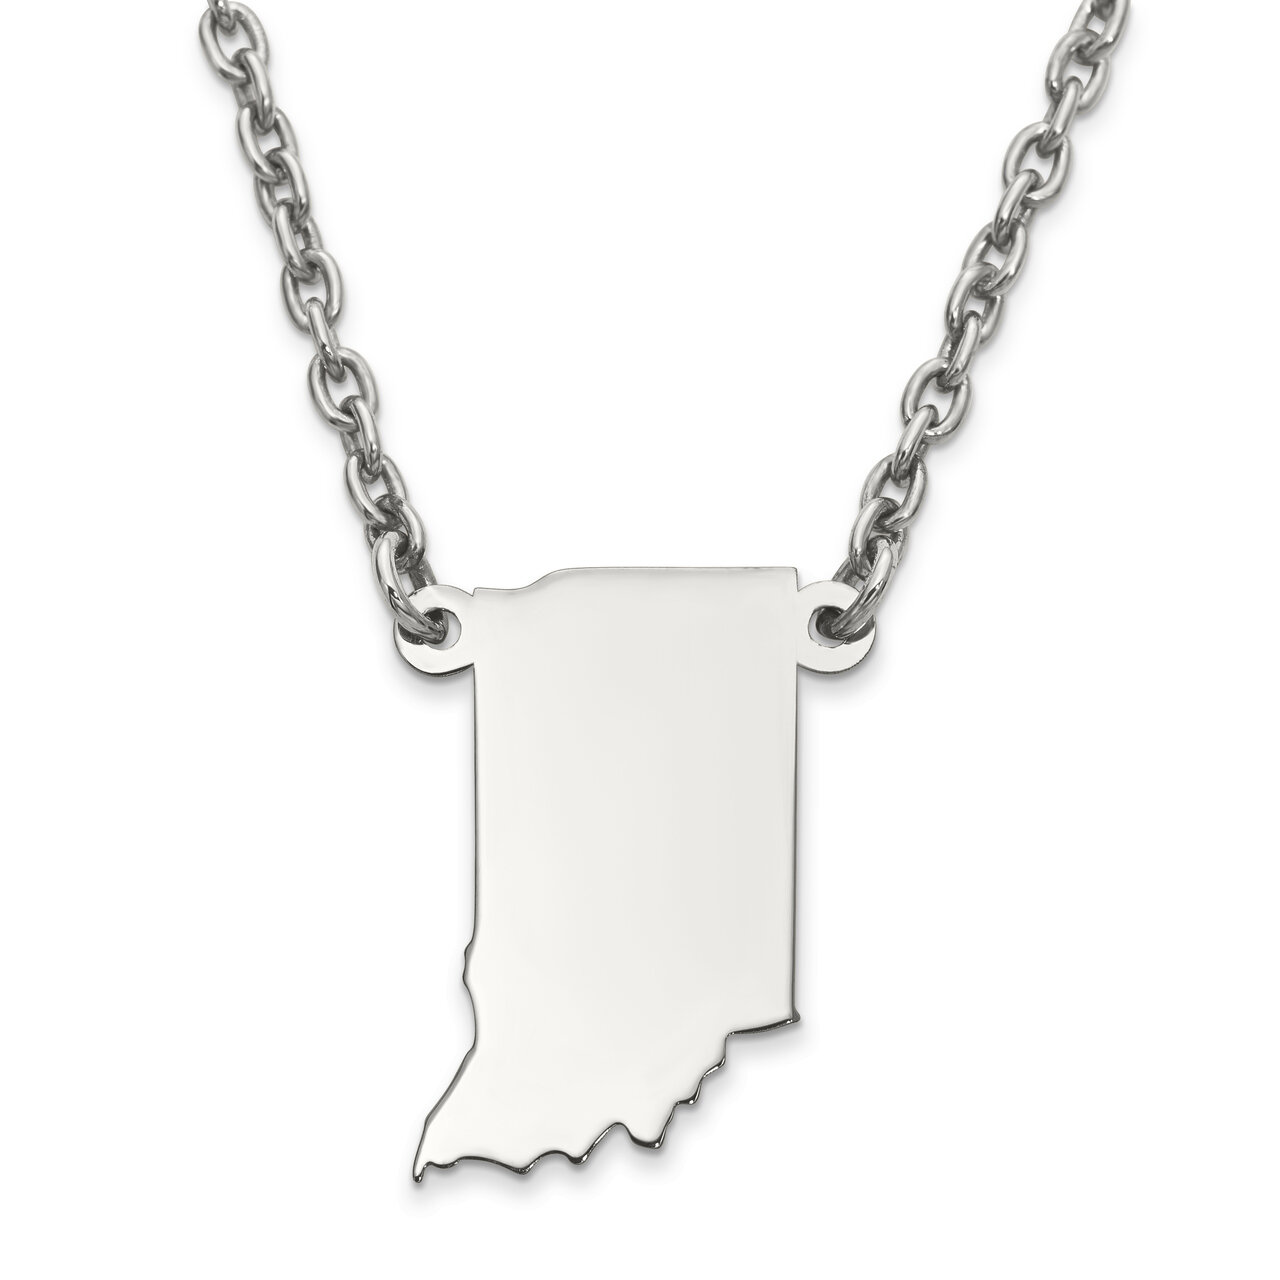 Indiana State Pendant Necklace with Chain 14k White Gold Engravable XNA706W-IN